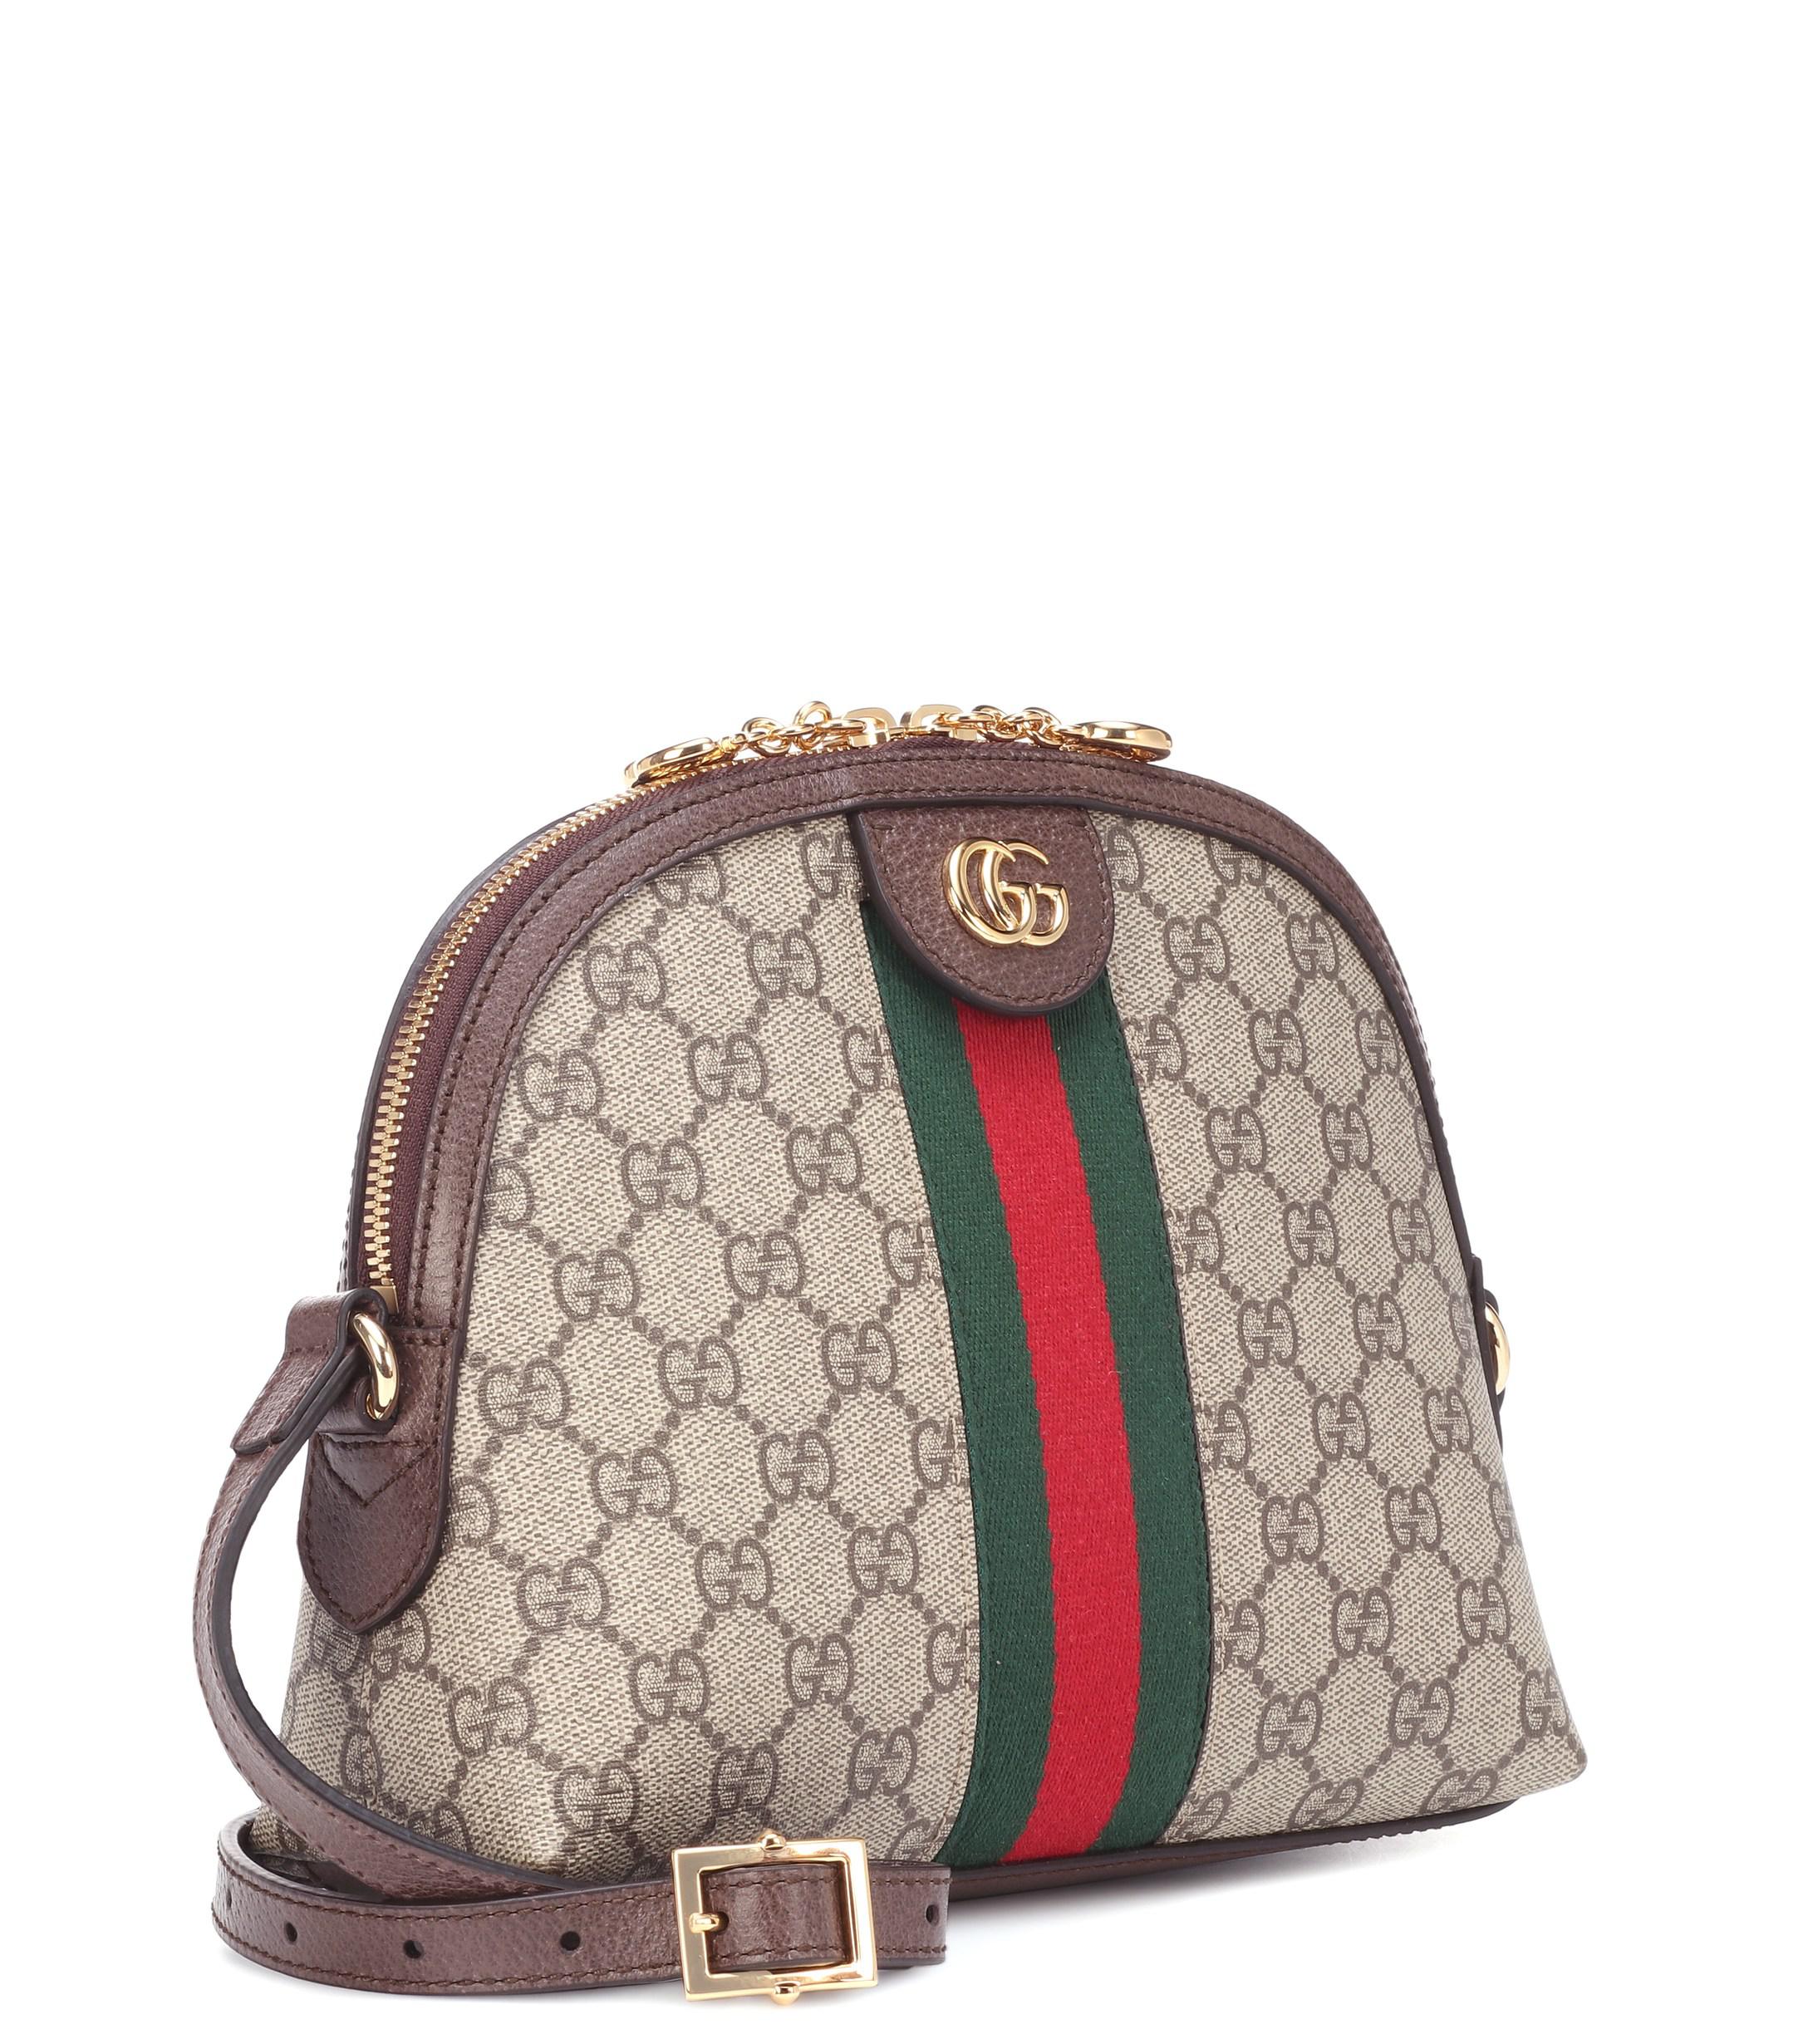 Gucci Ophidia GG Small Shoulder Bag in Brown - Lyst